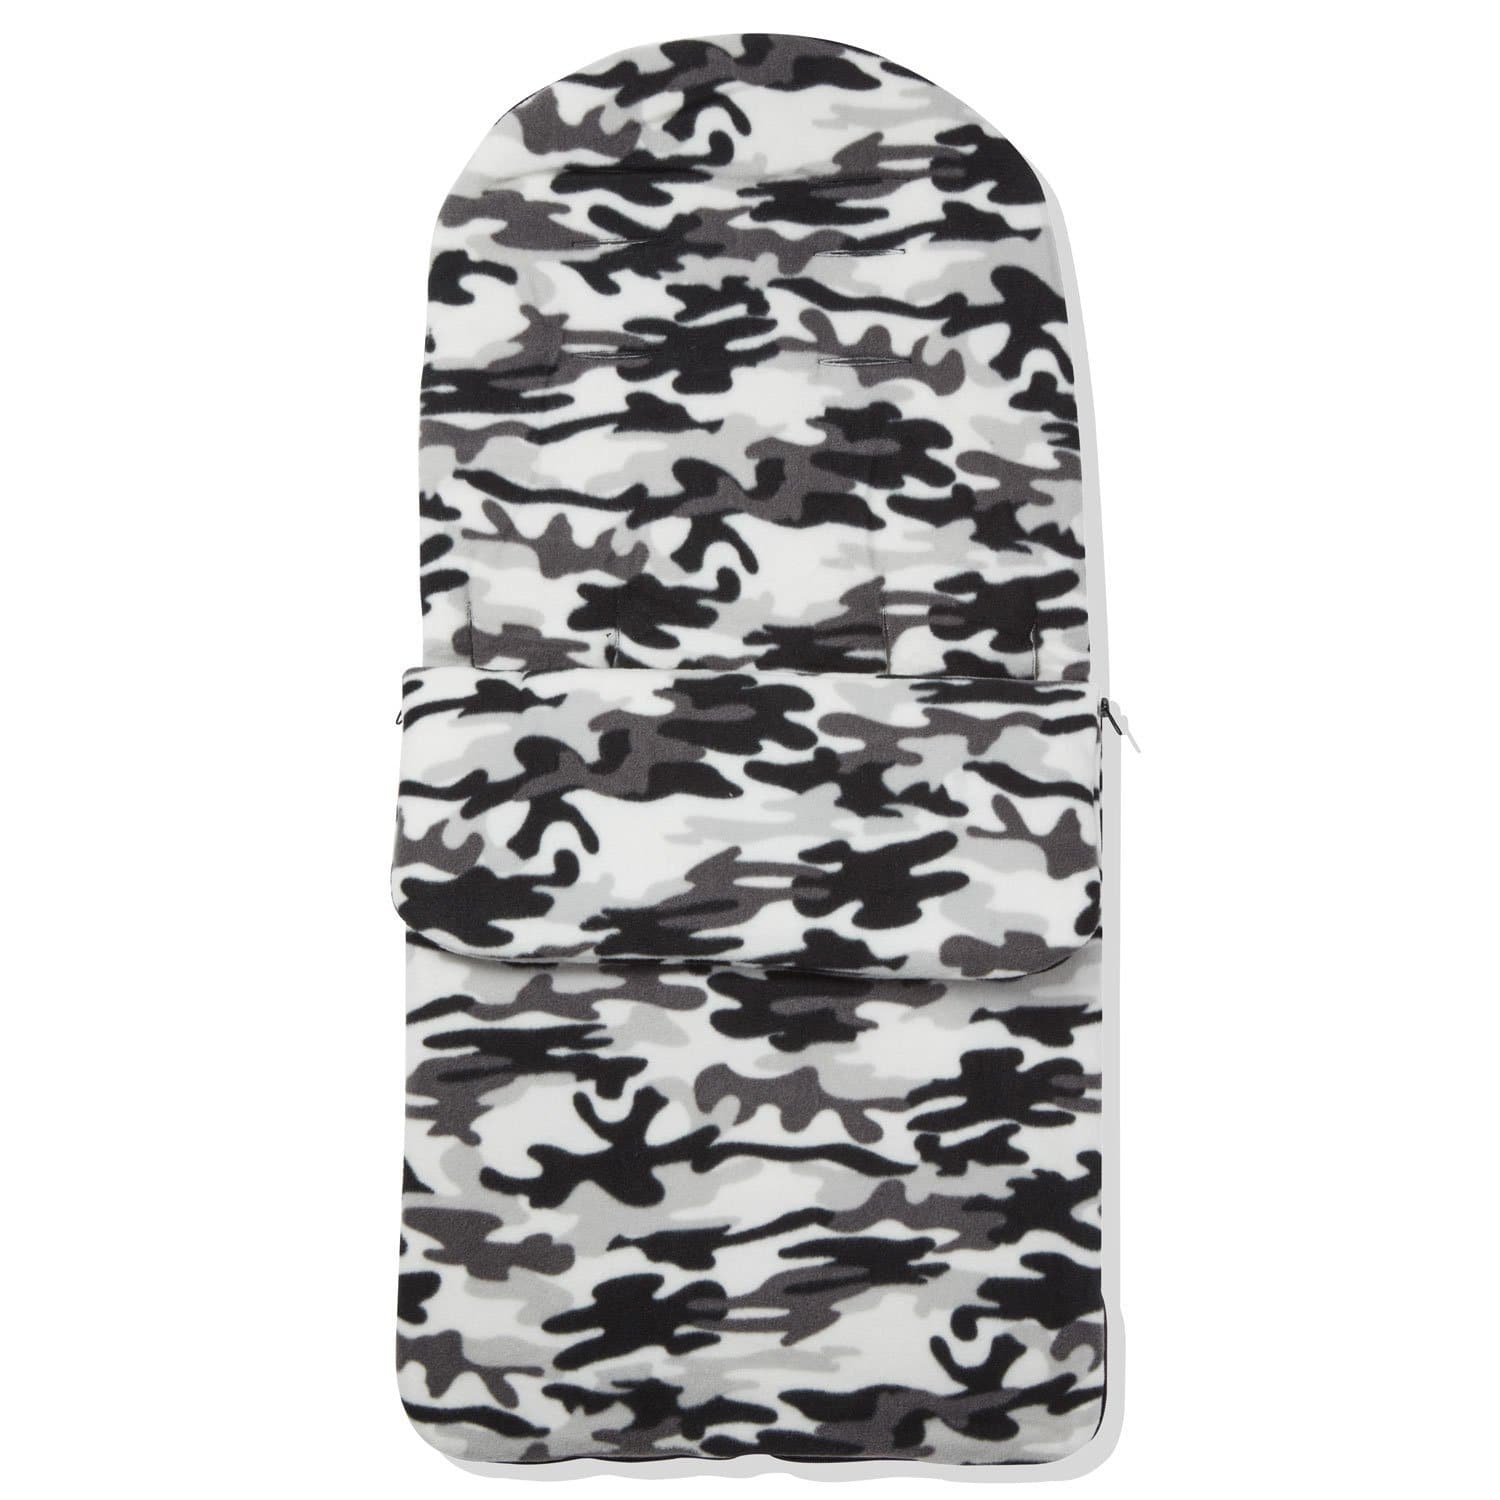 Fleece Footmuff / Cosy Toes Compatible With Baby Trend - Grey Camouflage / Fits All Models | For Your Little One